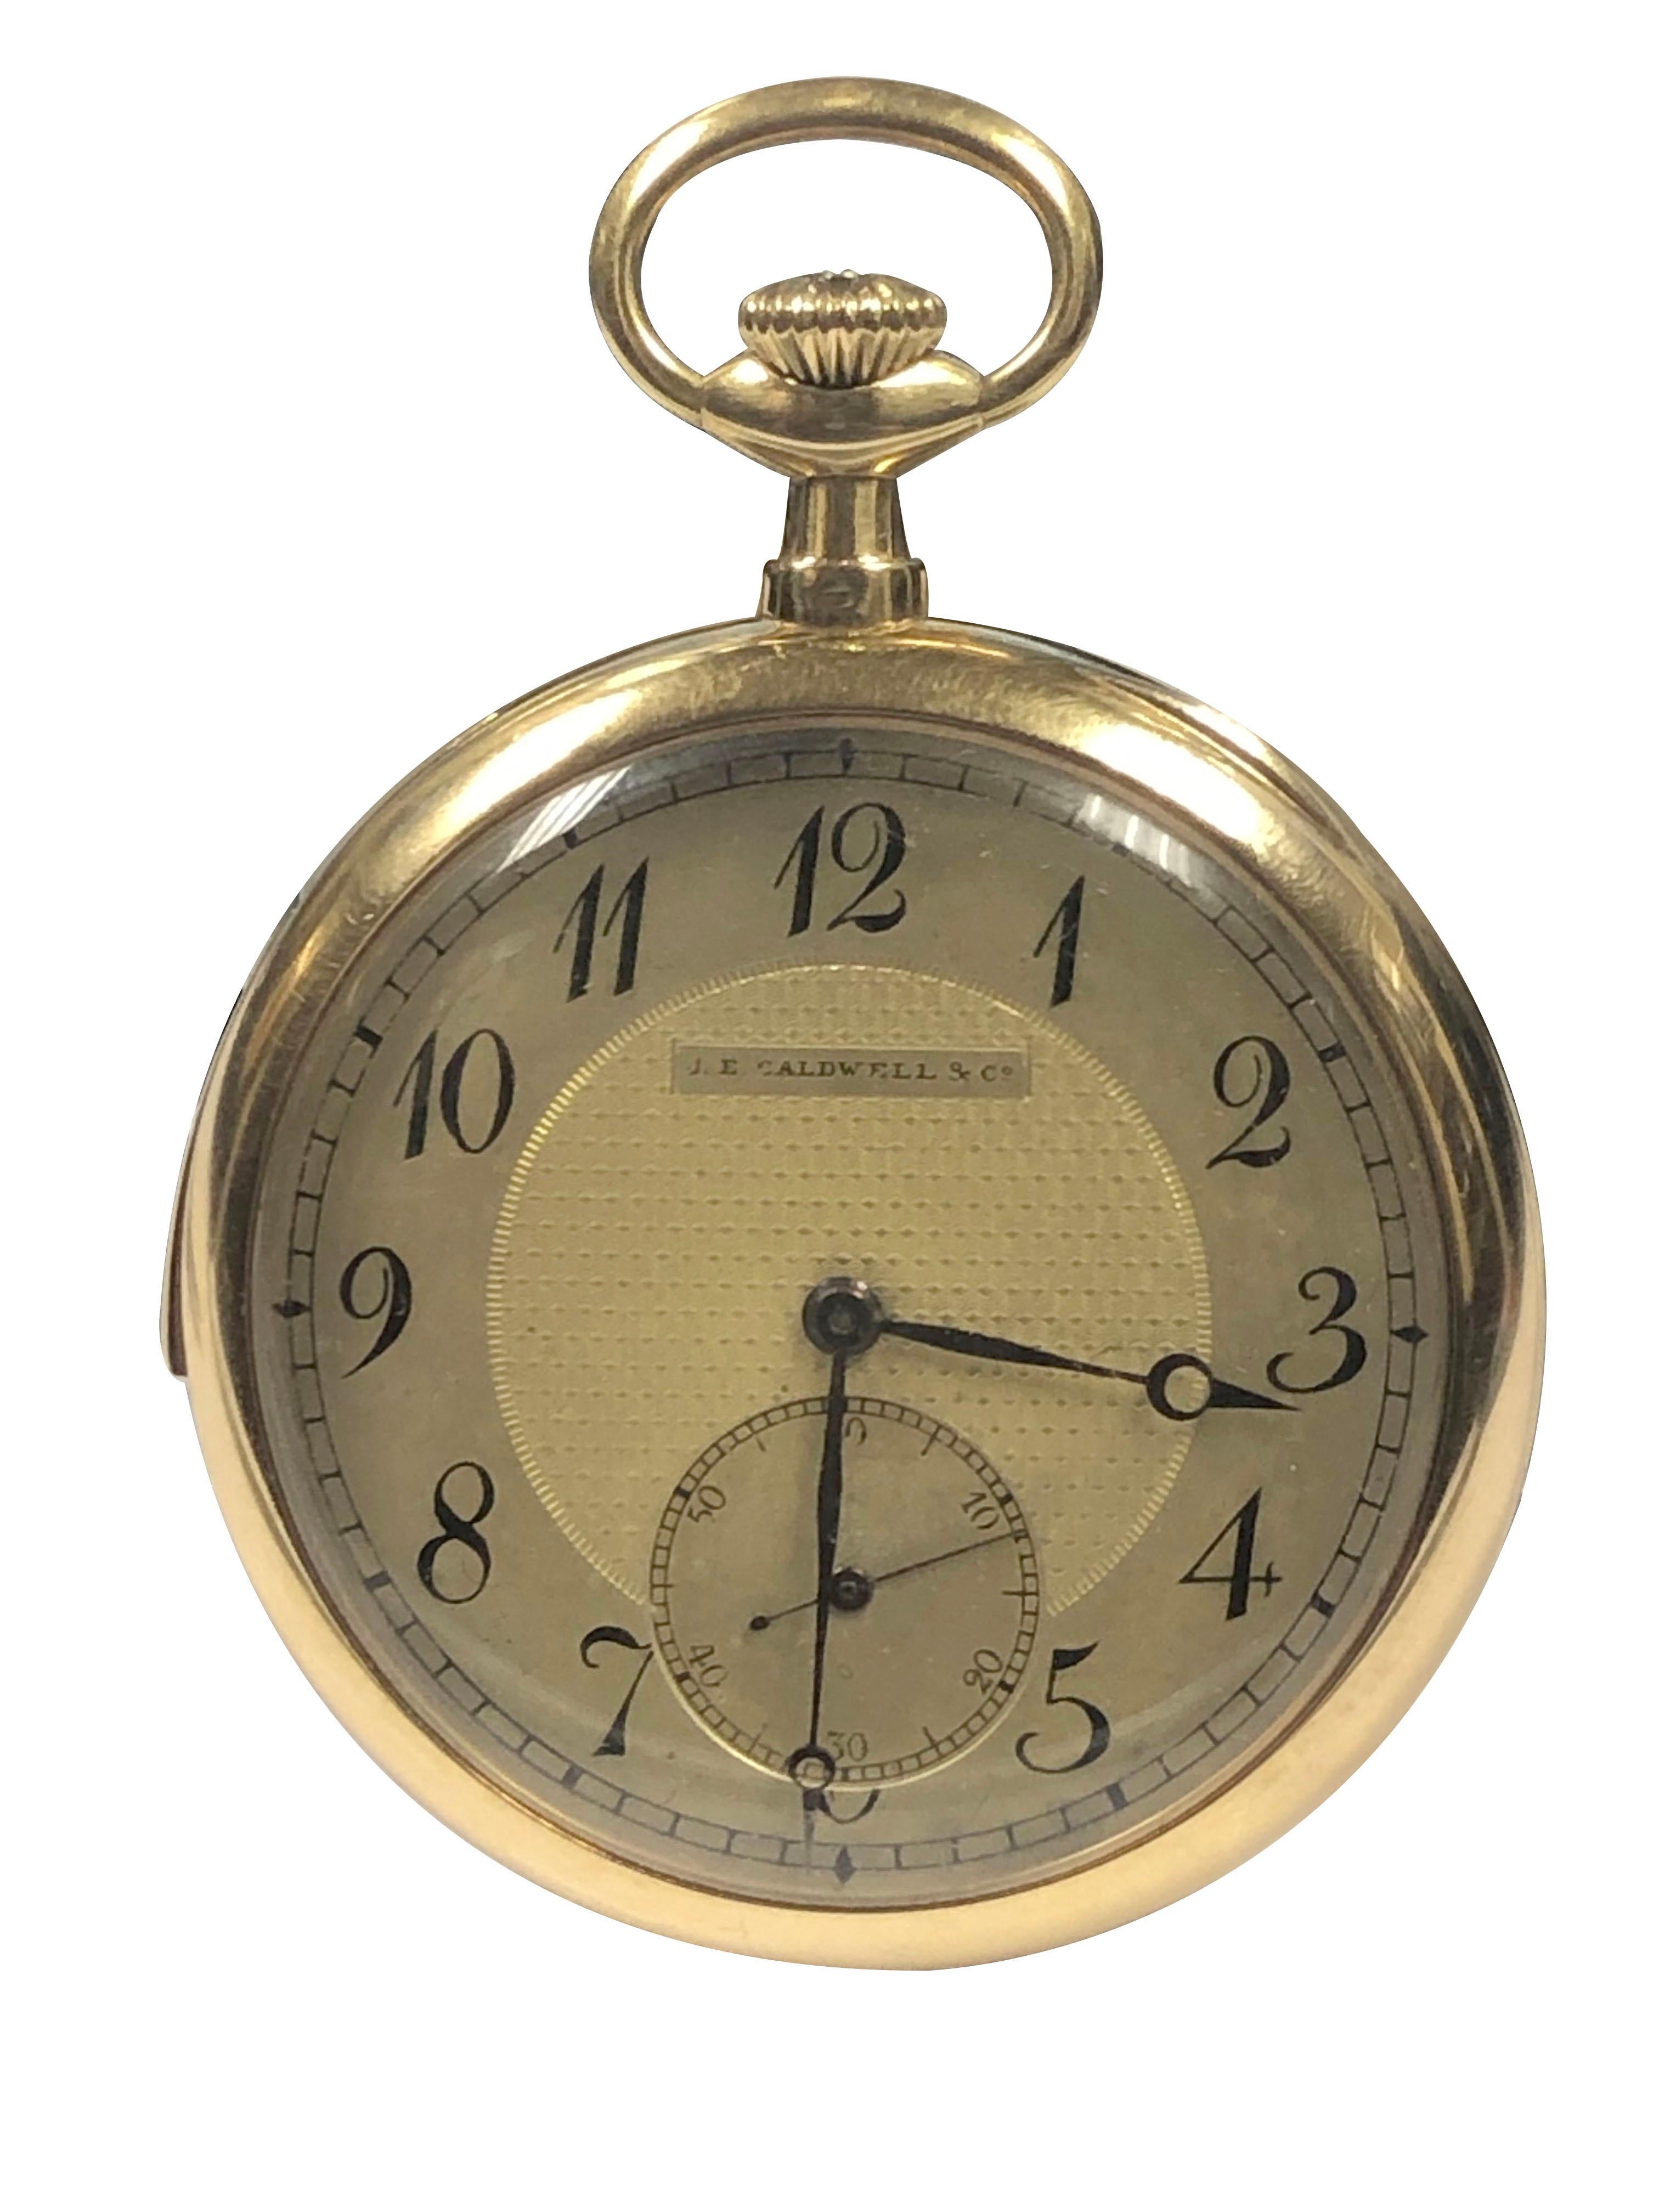 J.E. Caldwell High Grade Minute Repeater Gold Cased Pocket Watch 2